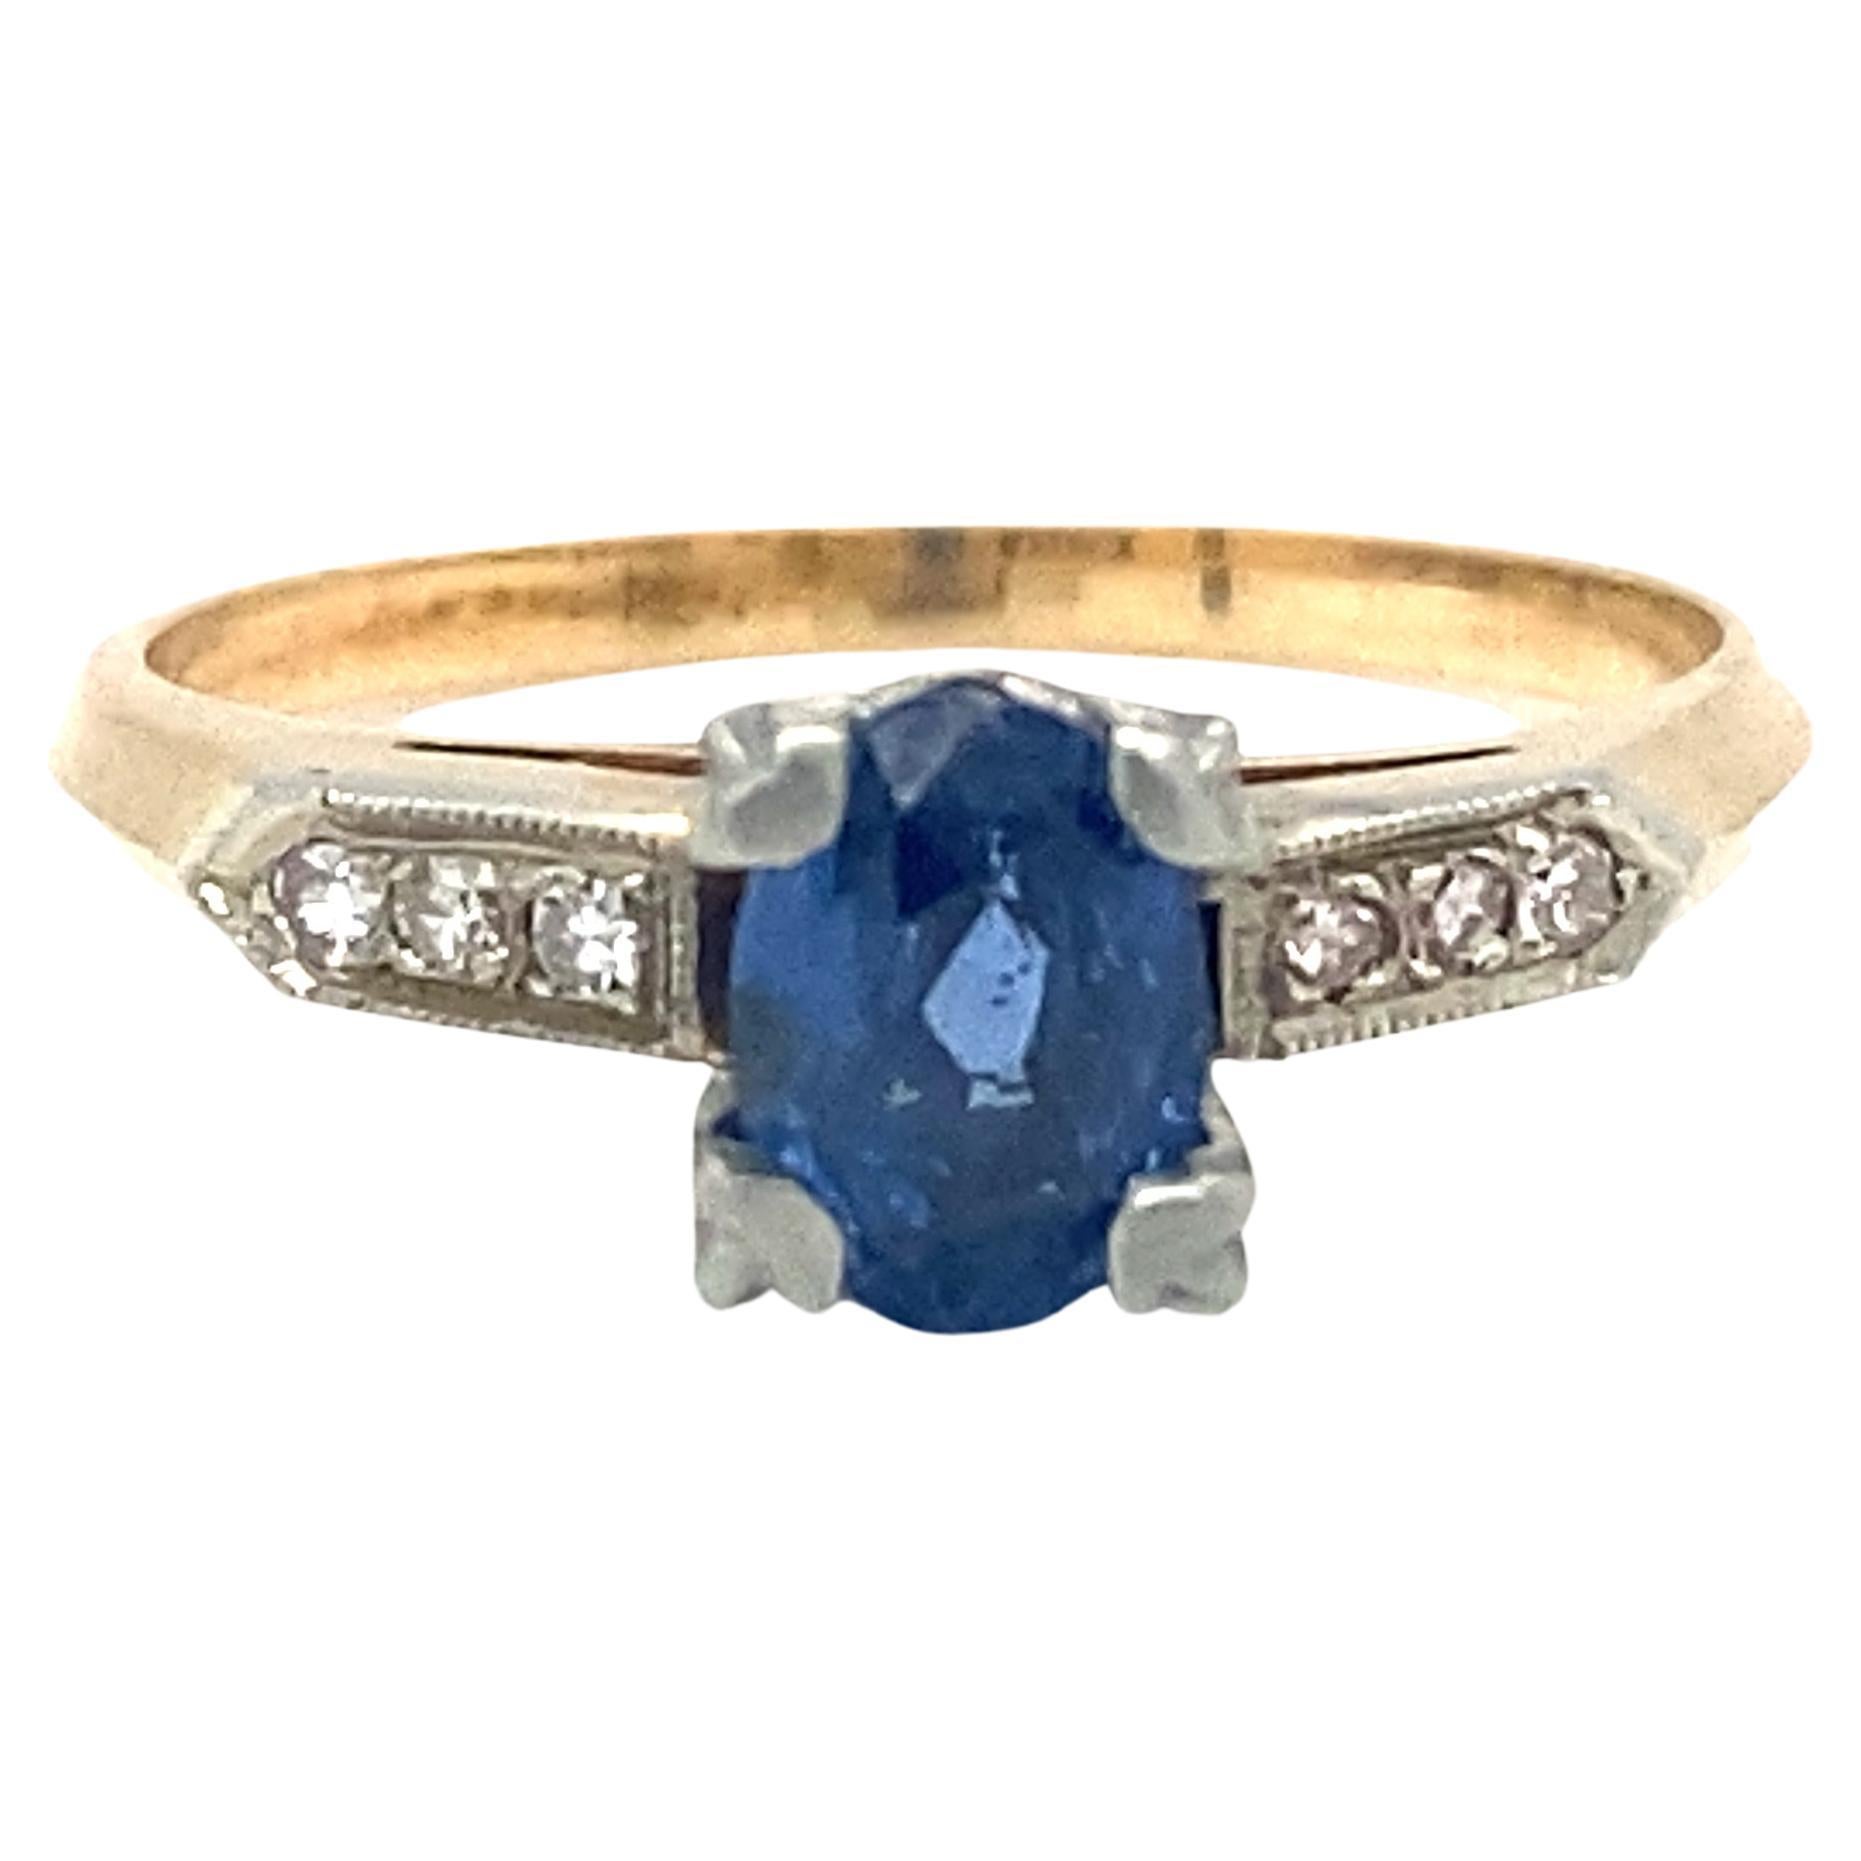 Circa 1920s 1 Carat Oval No Heat Sapphire and Diamond Ring in Two-Tone Gold